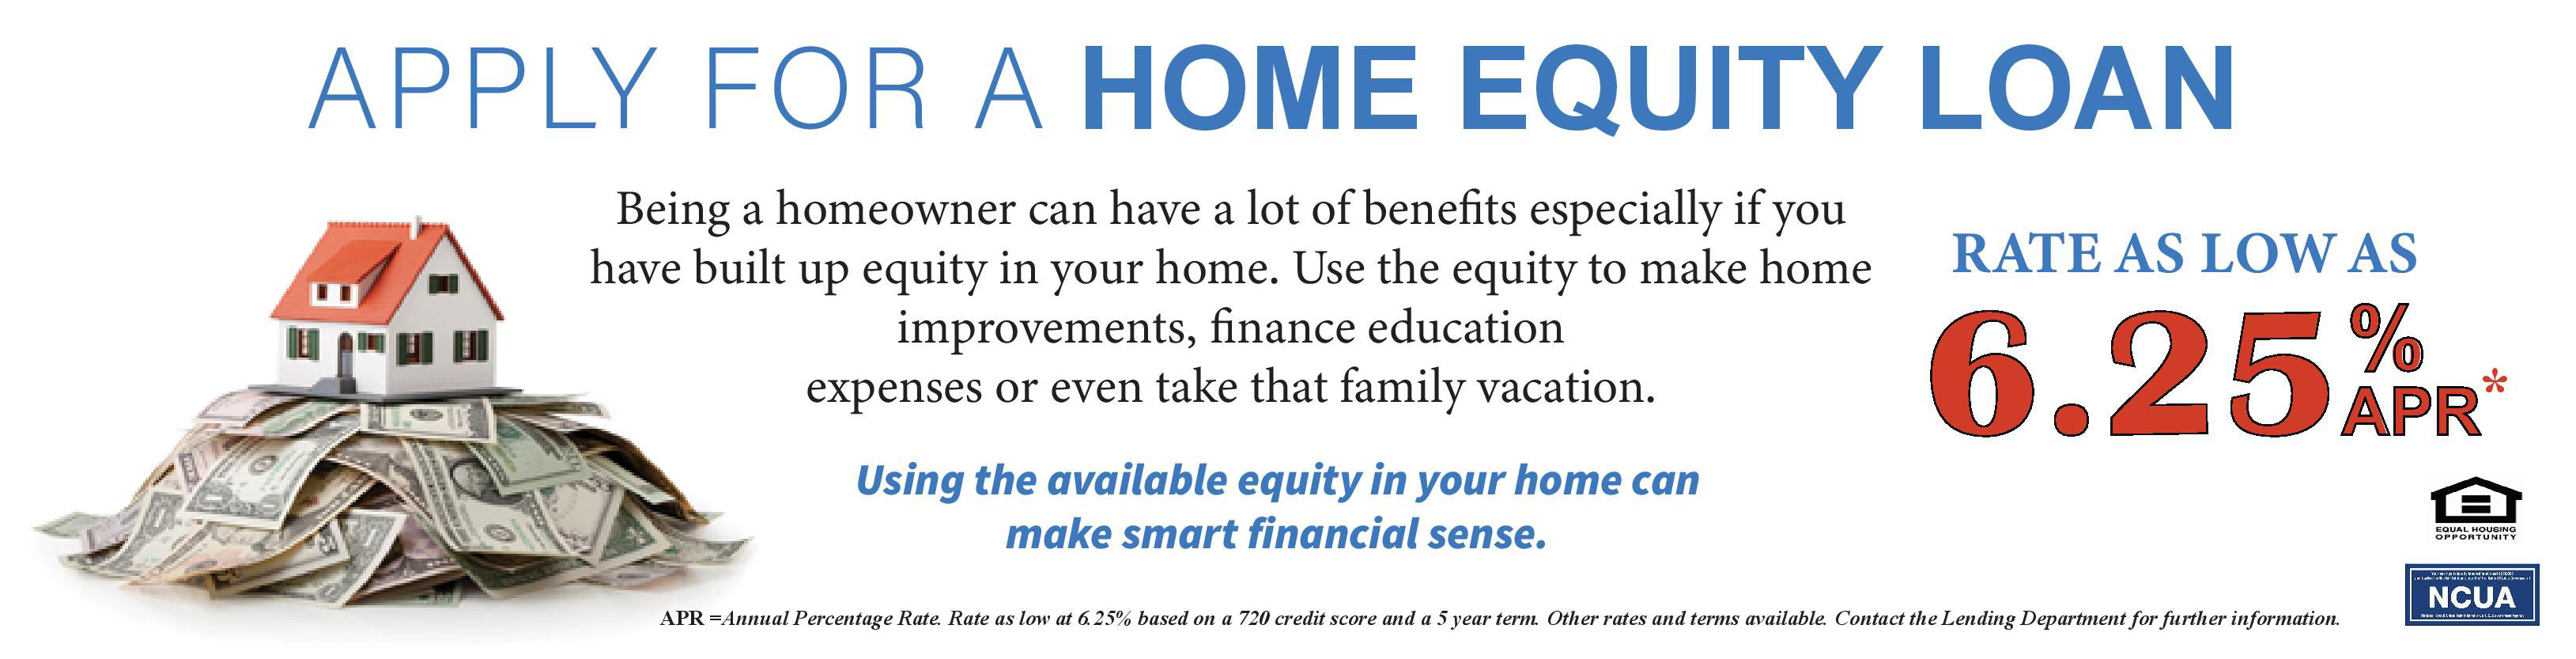 Apply for a home equity loan. Rates as low as 6.25% apr